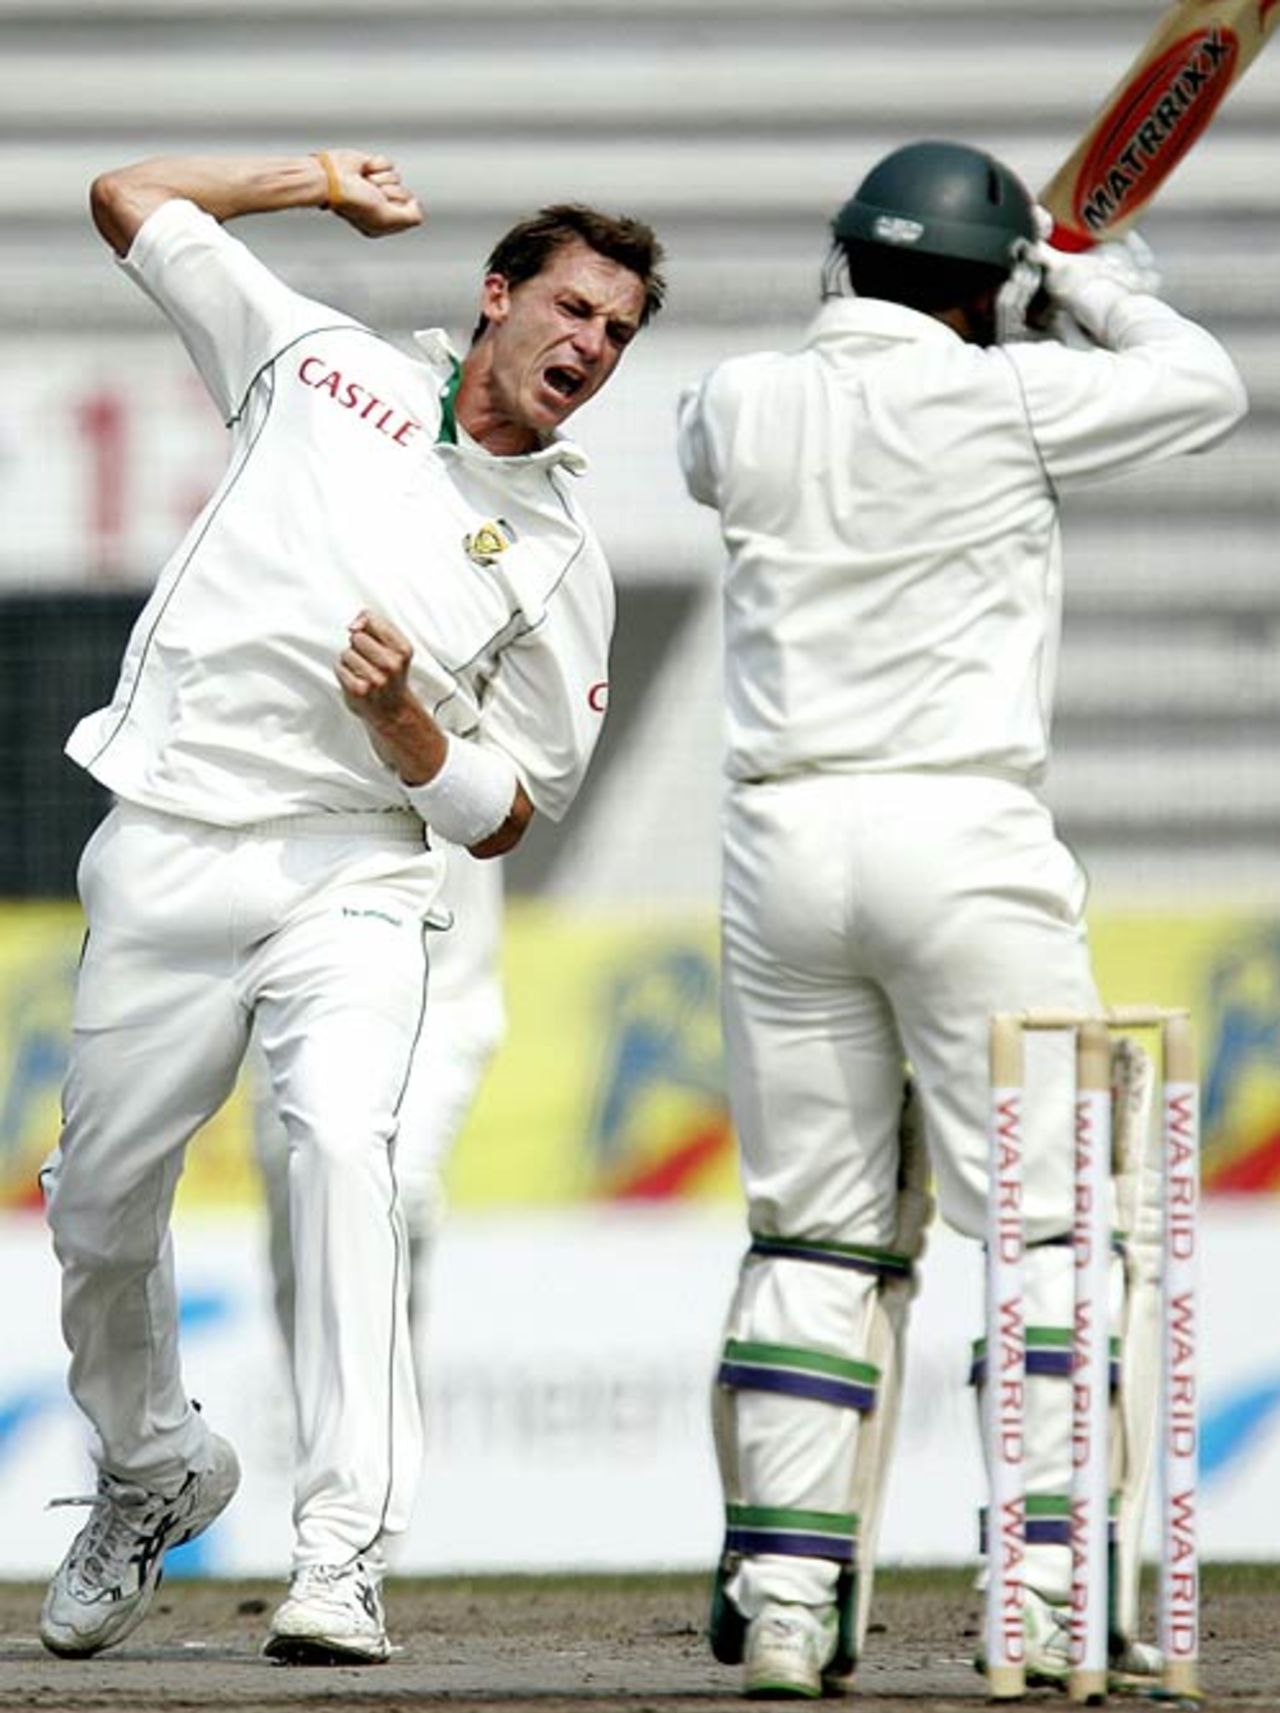 Dale Steyn punches the air after dismissing Aftab Ahmed, Bangladesh v South Africa, 1st Test, Mirpur, 3rd day, February 24, 2008 